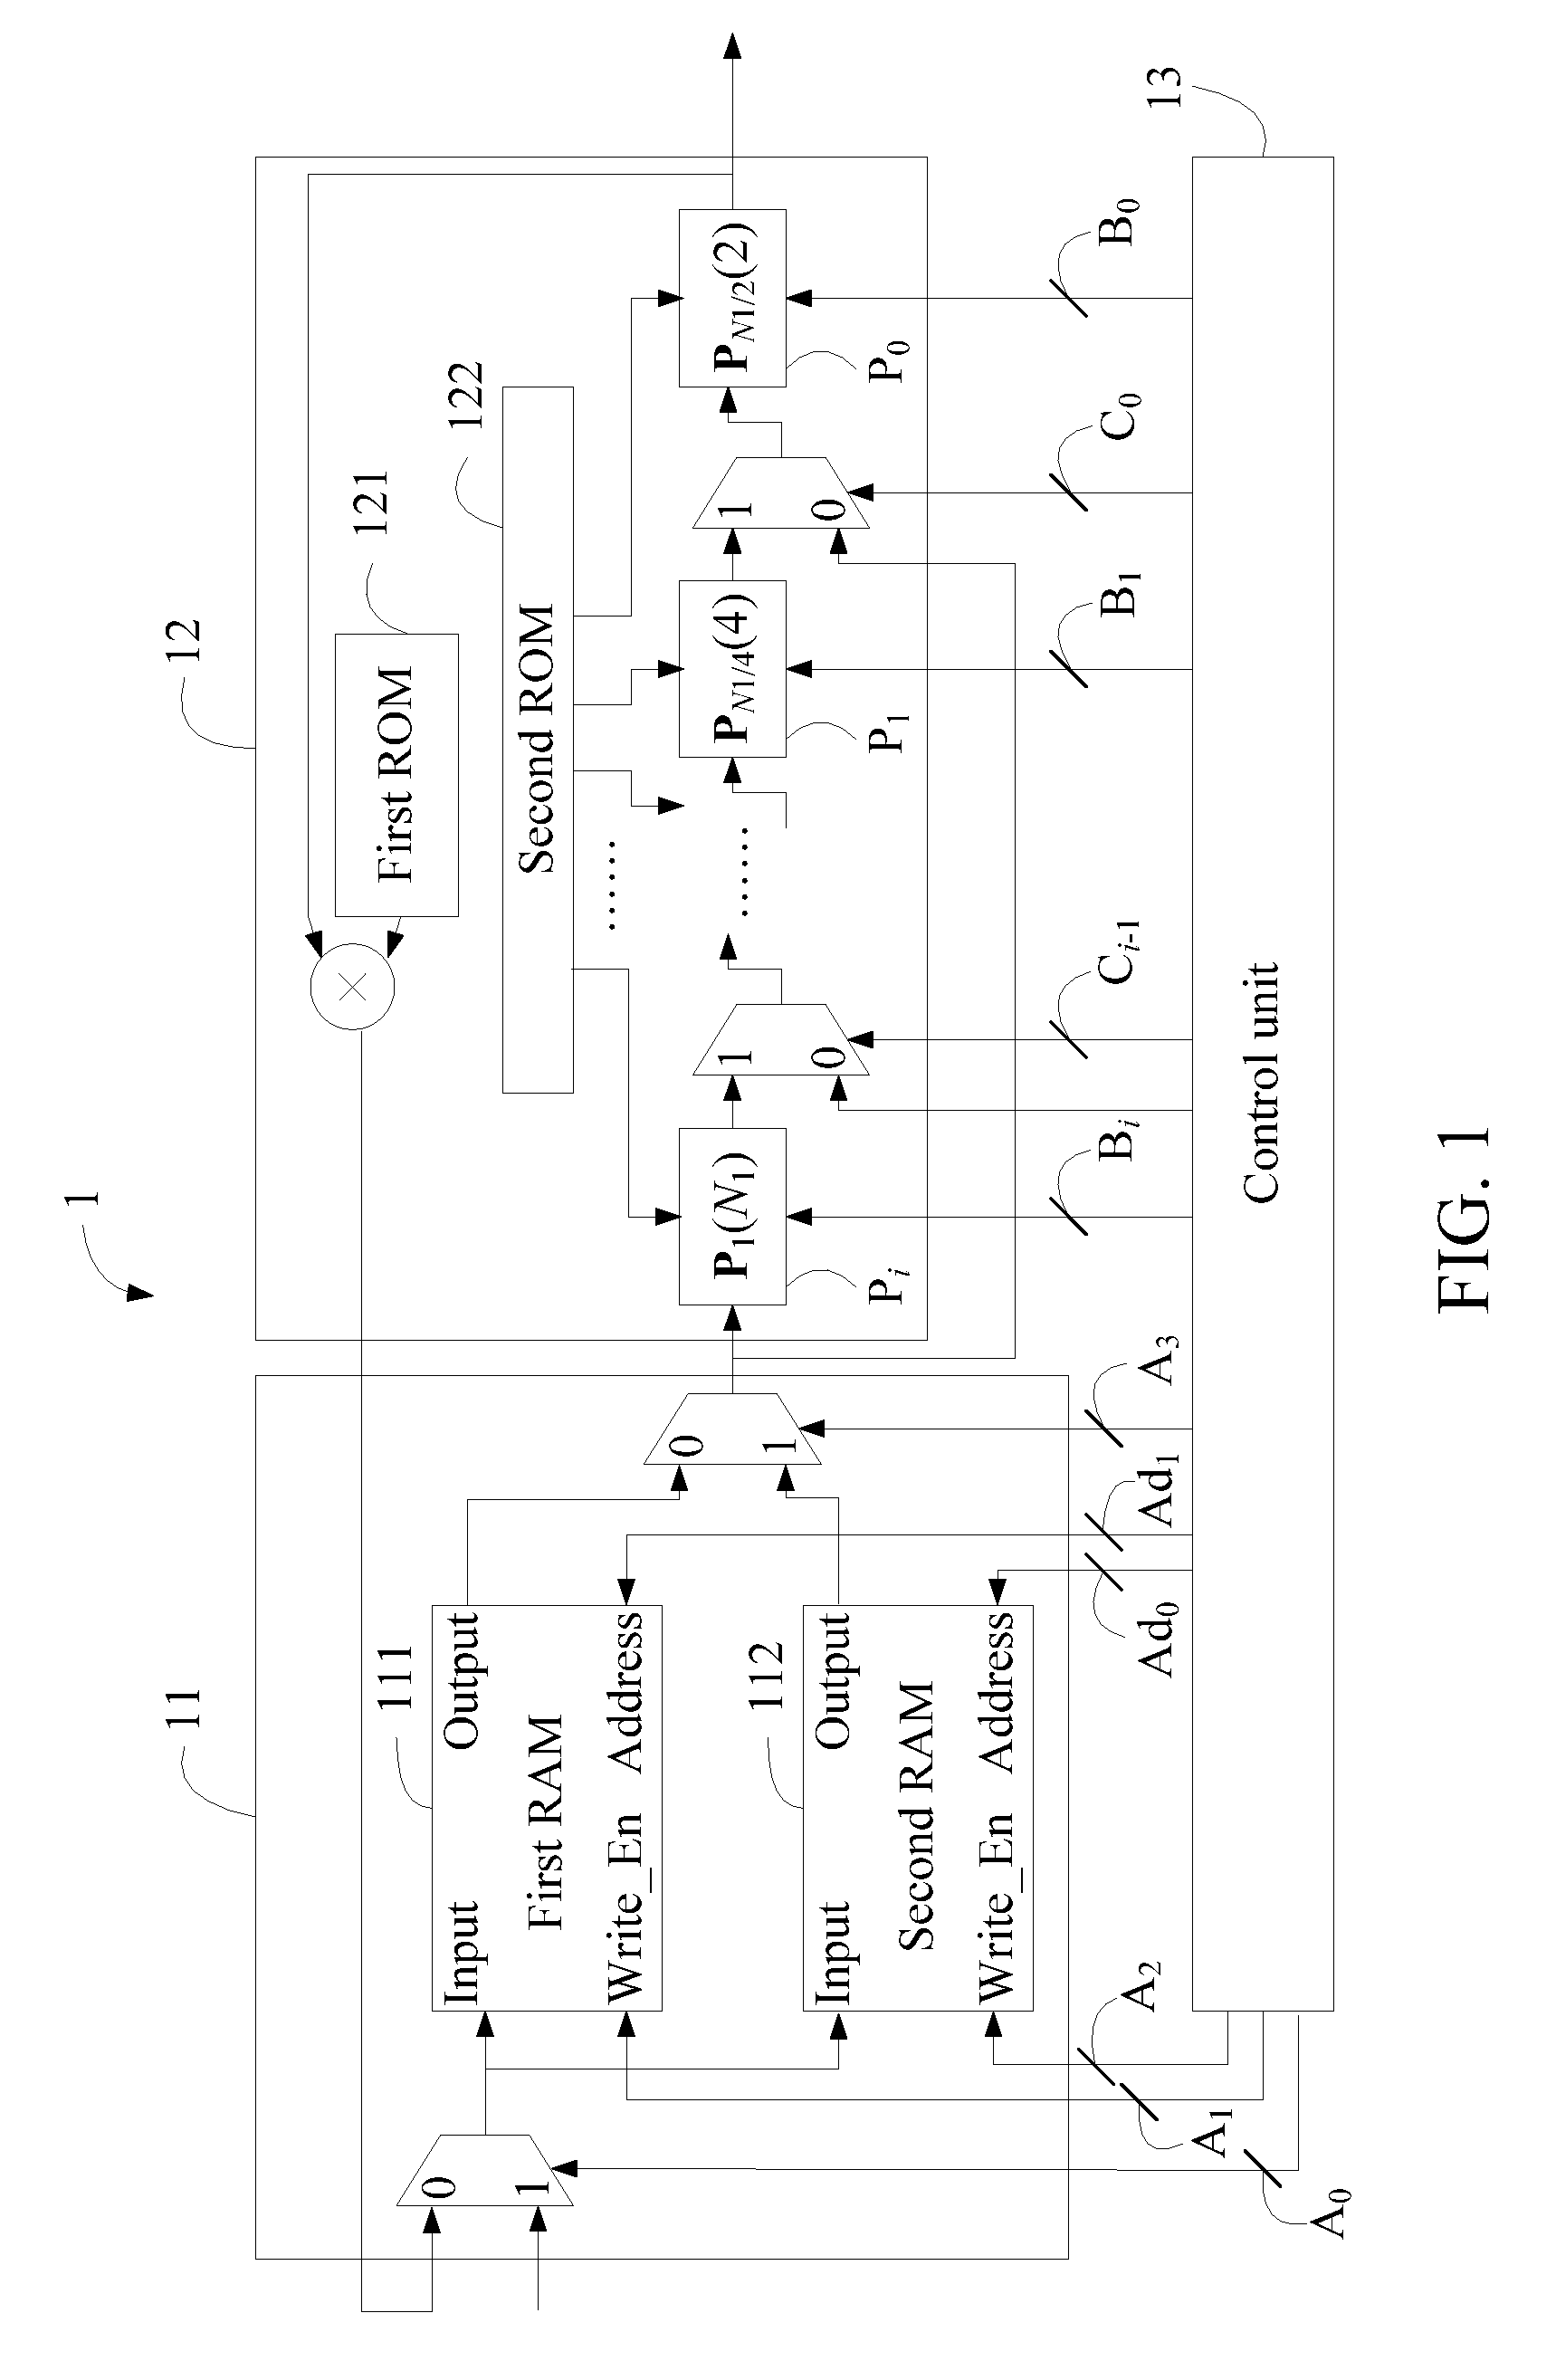 Apparatus for calculating an n-point discrete fourier transform by utilizing cooley-tukey algorithm